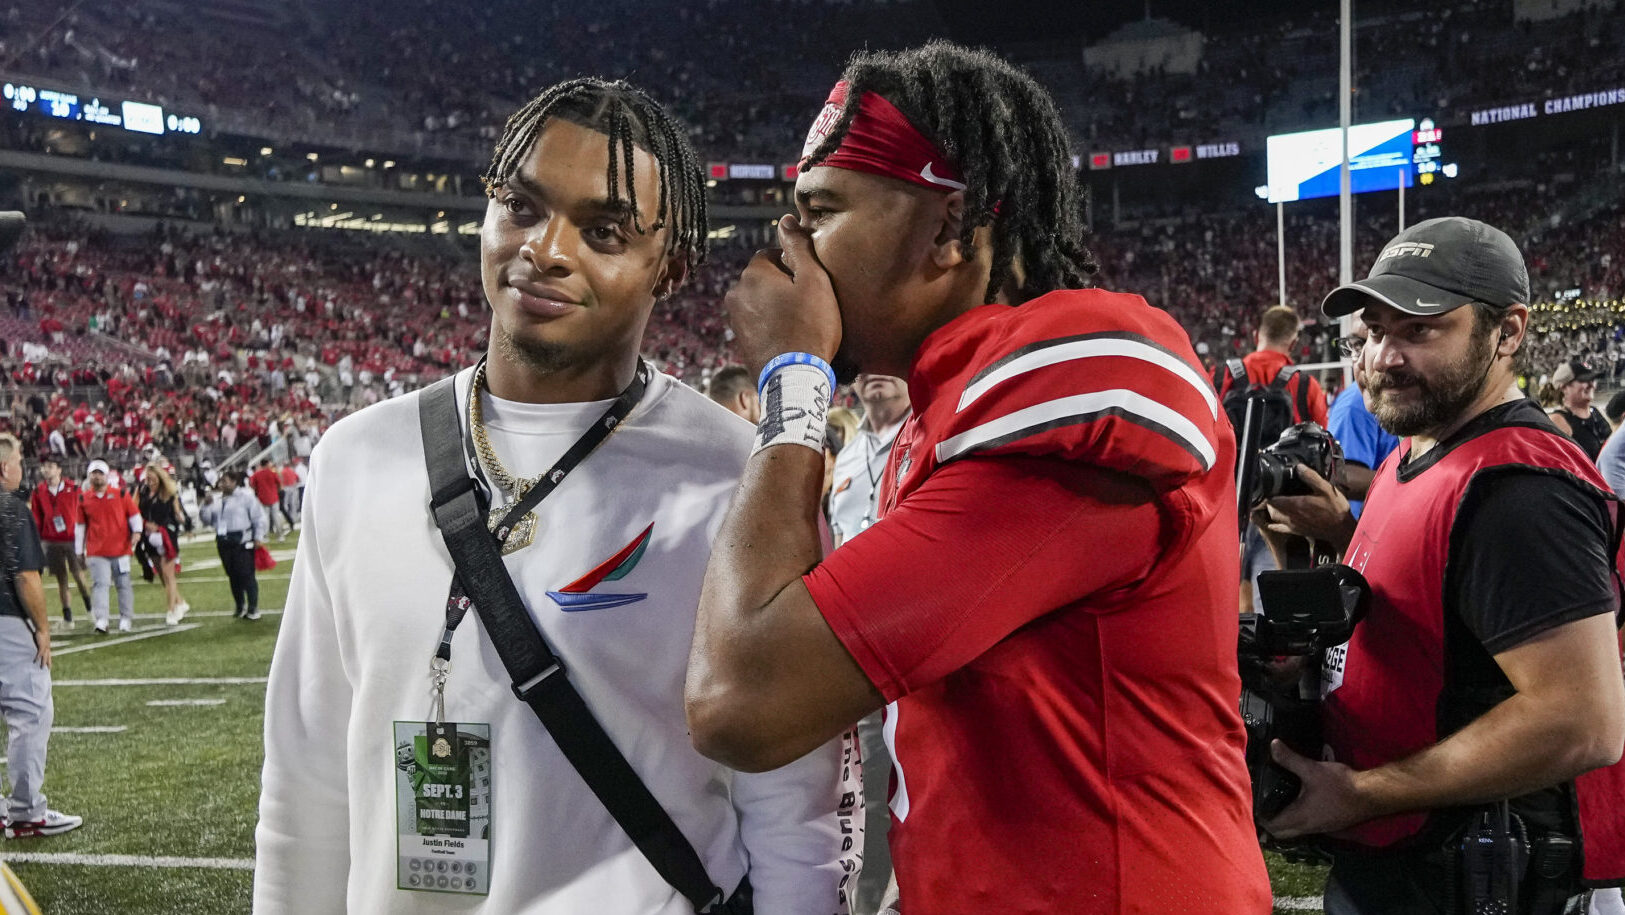 Ohio State QBs Justin Fields, C.J. Stroud